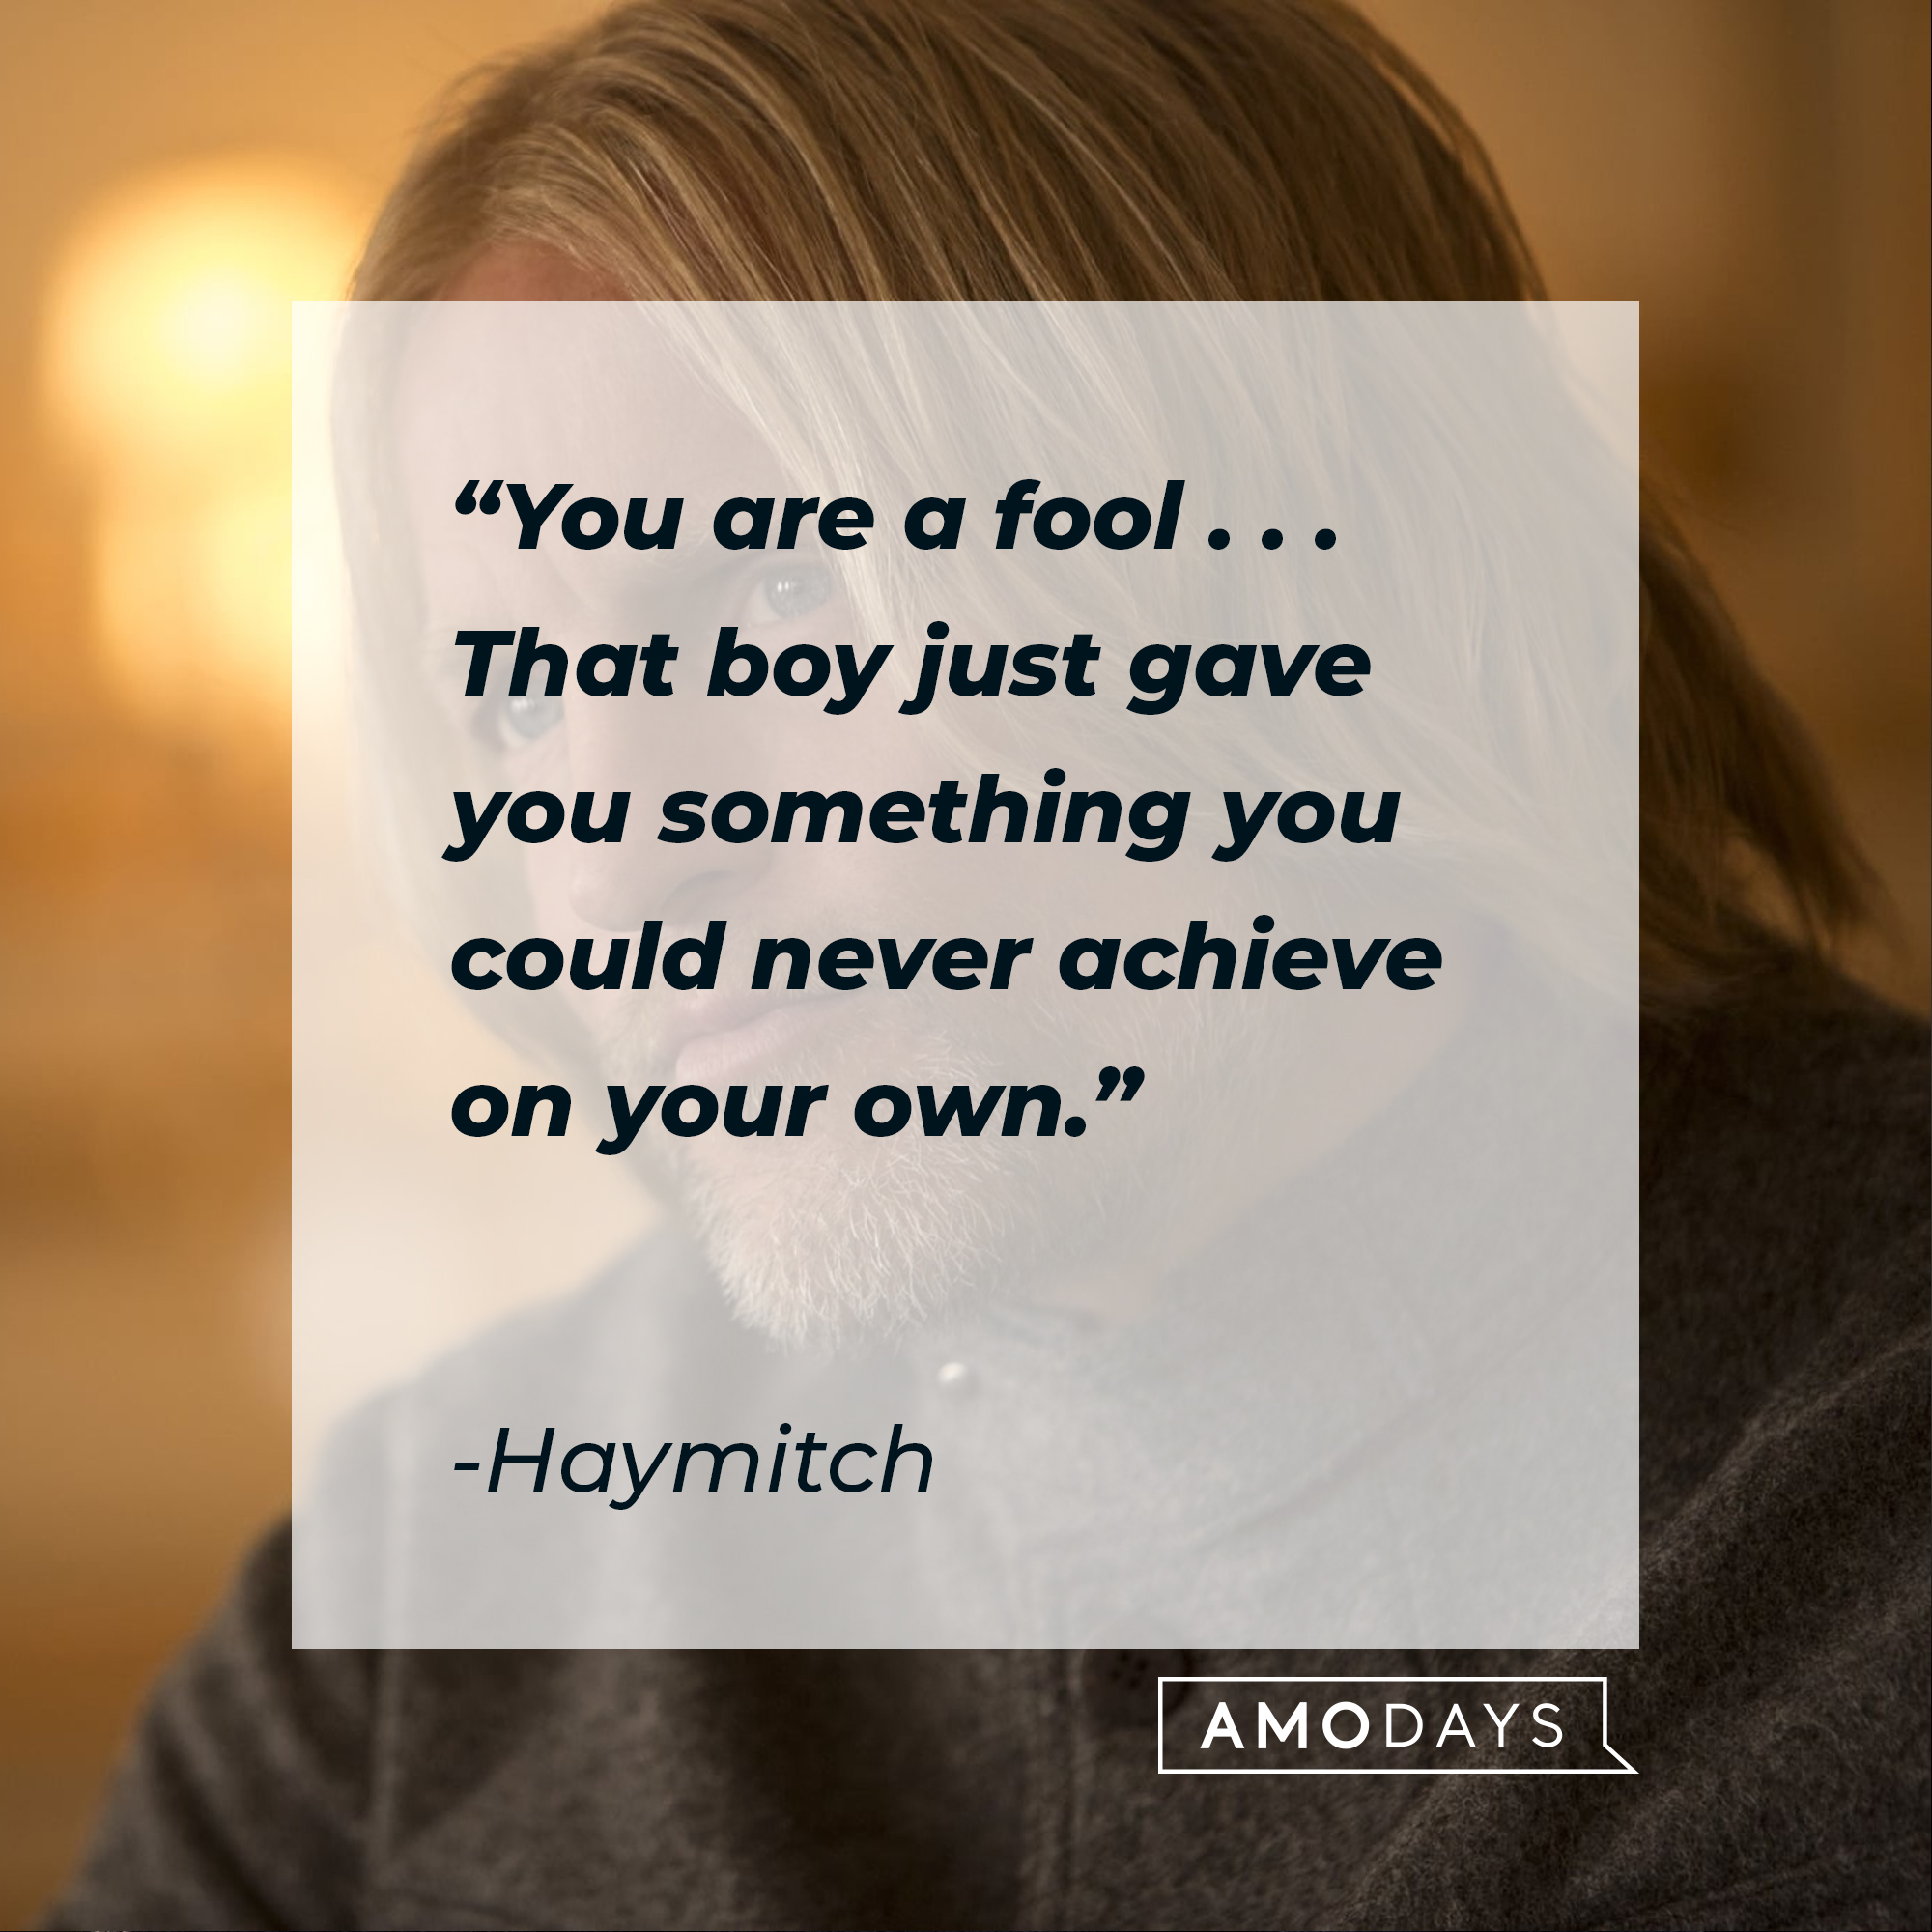 Haymitch's quote: “You are a fool . . . That boy just gave you something you could never achieve on your own.” | Source: facebook.com/TheHungerGamesMovie